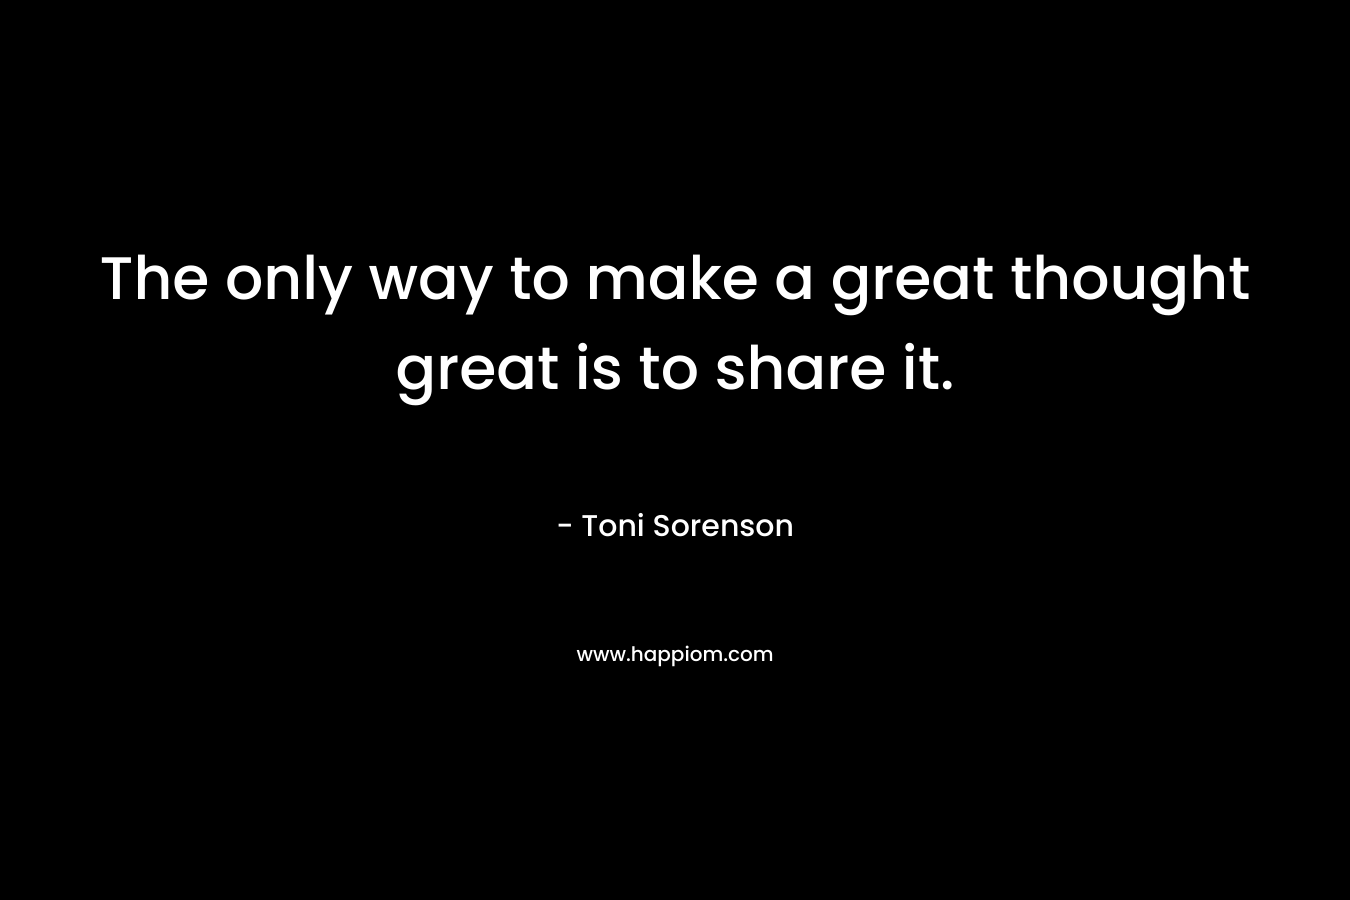 The only way to make a great thought great is to share it.